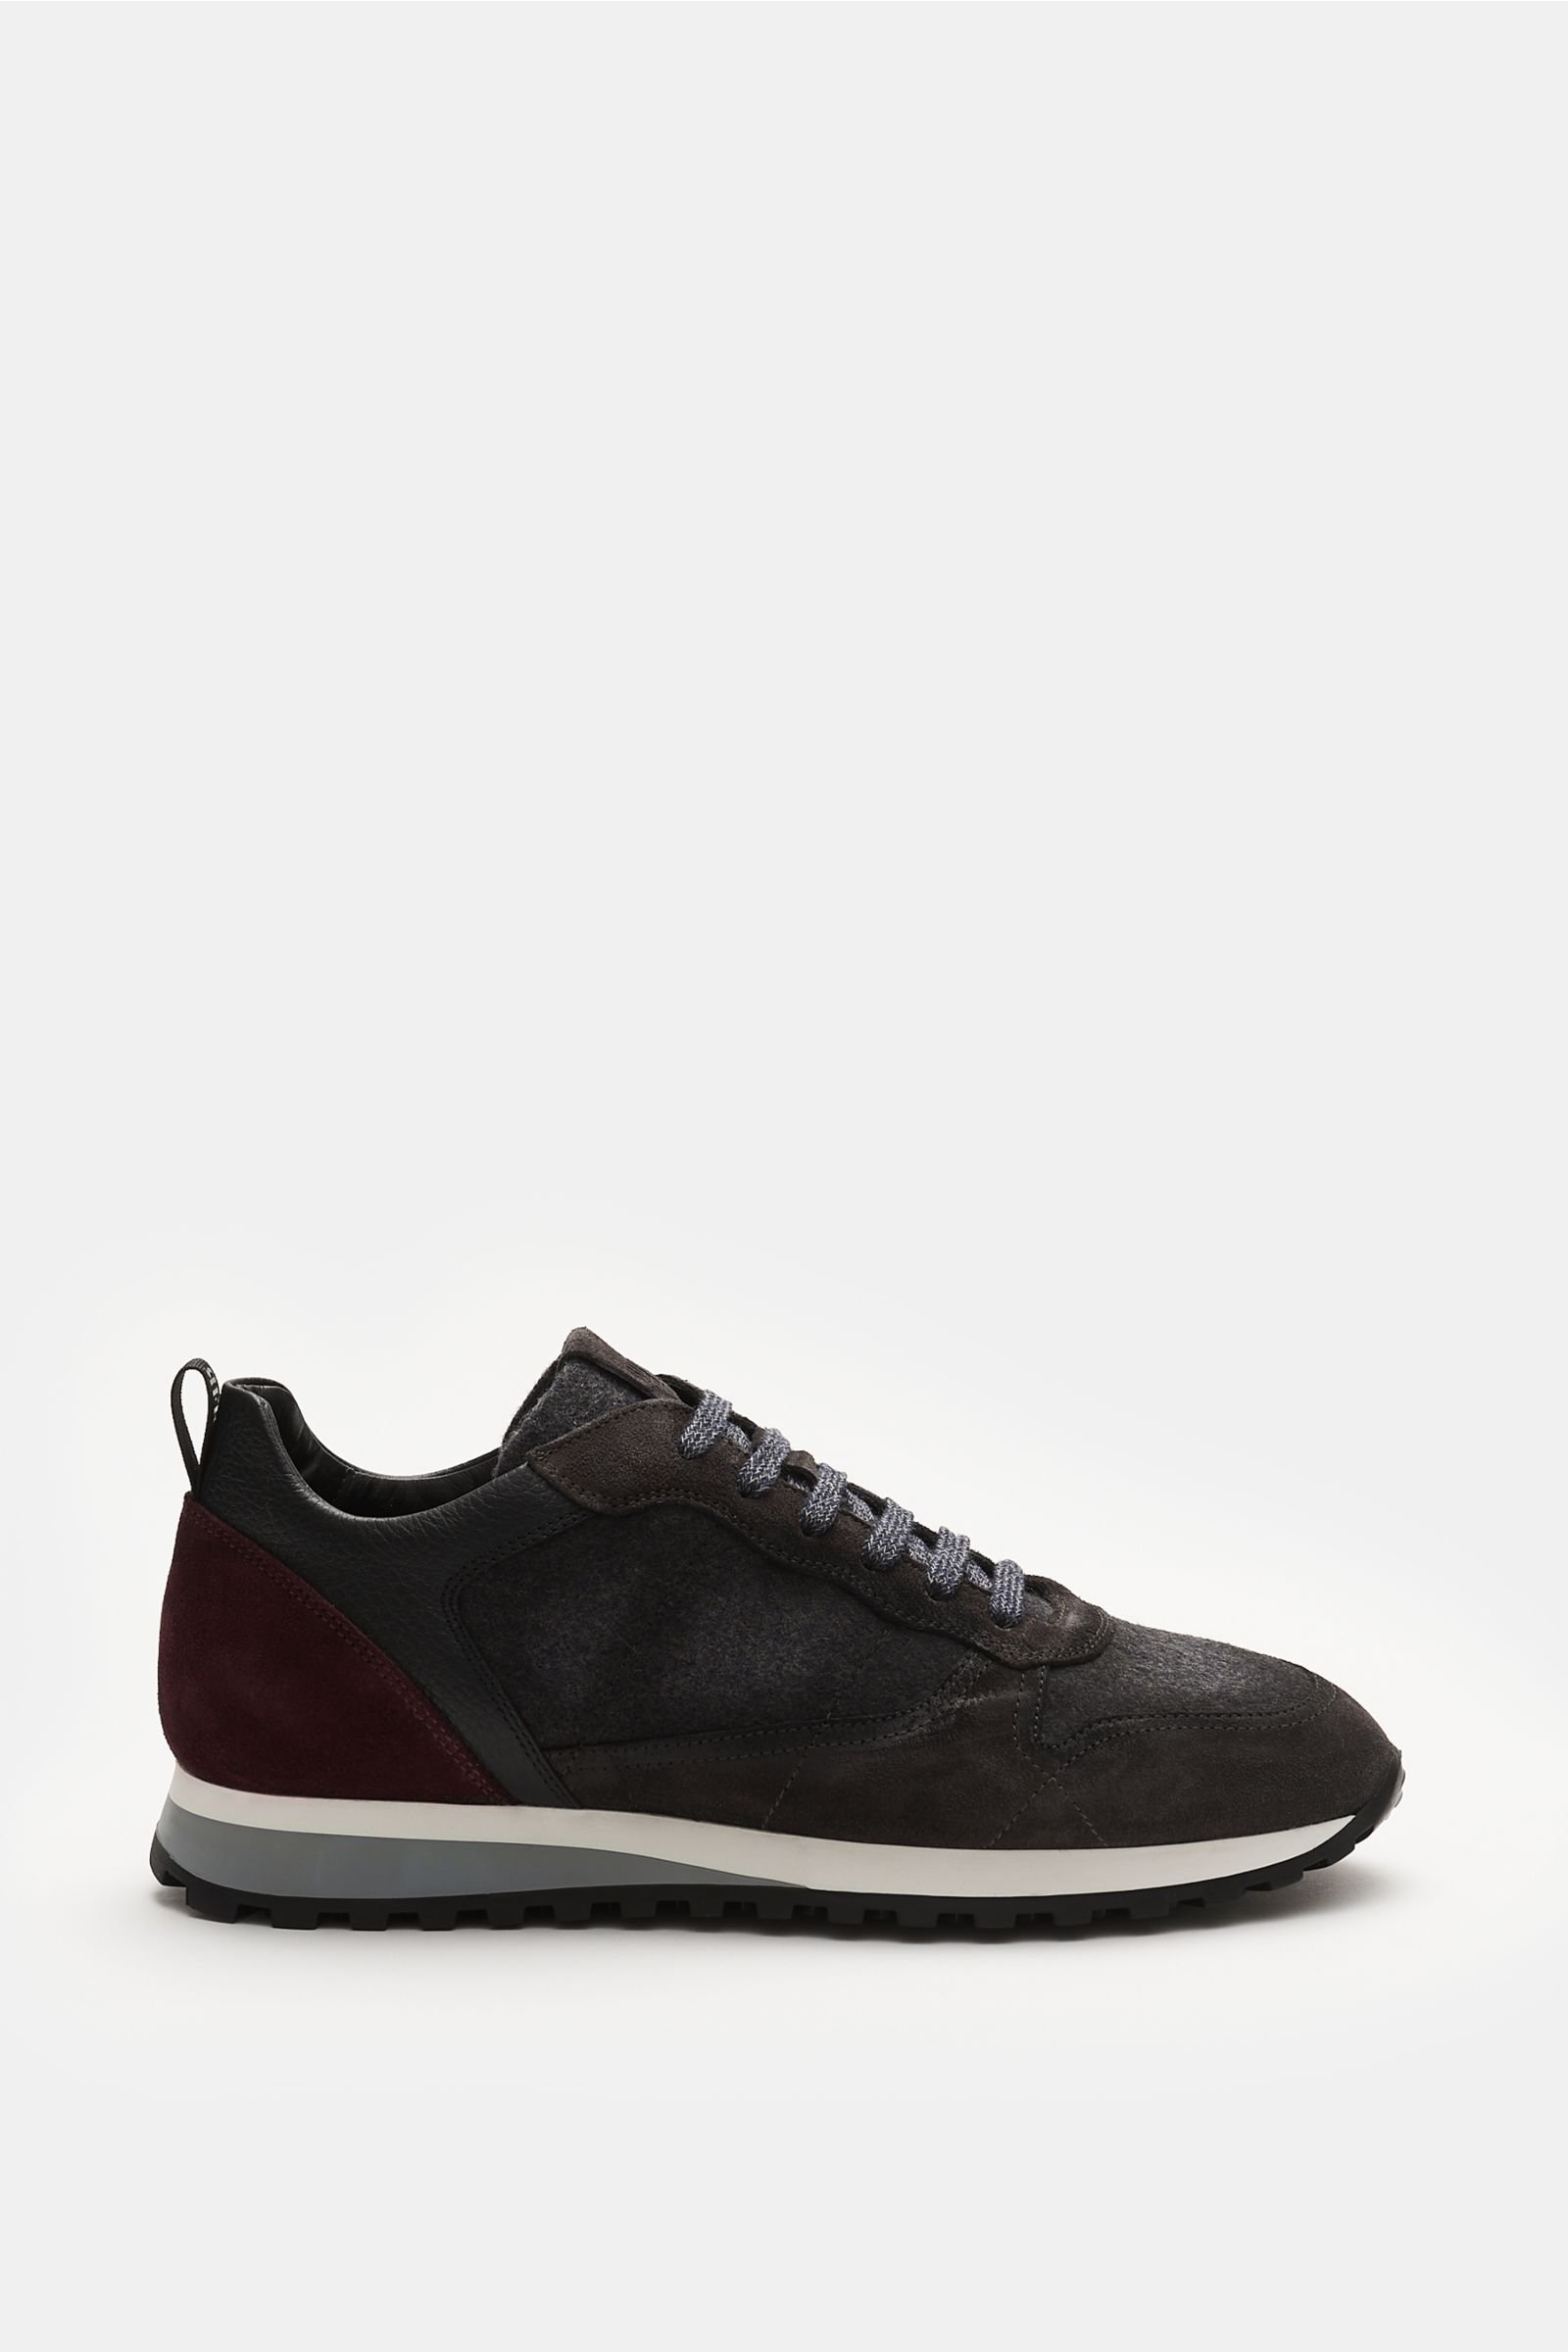 Sneakers anthracite/burgundy